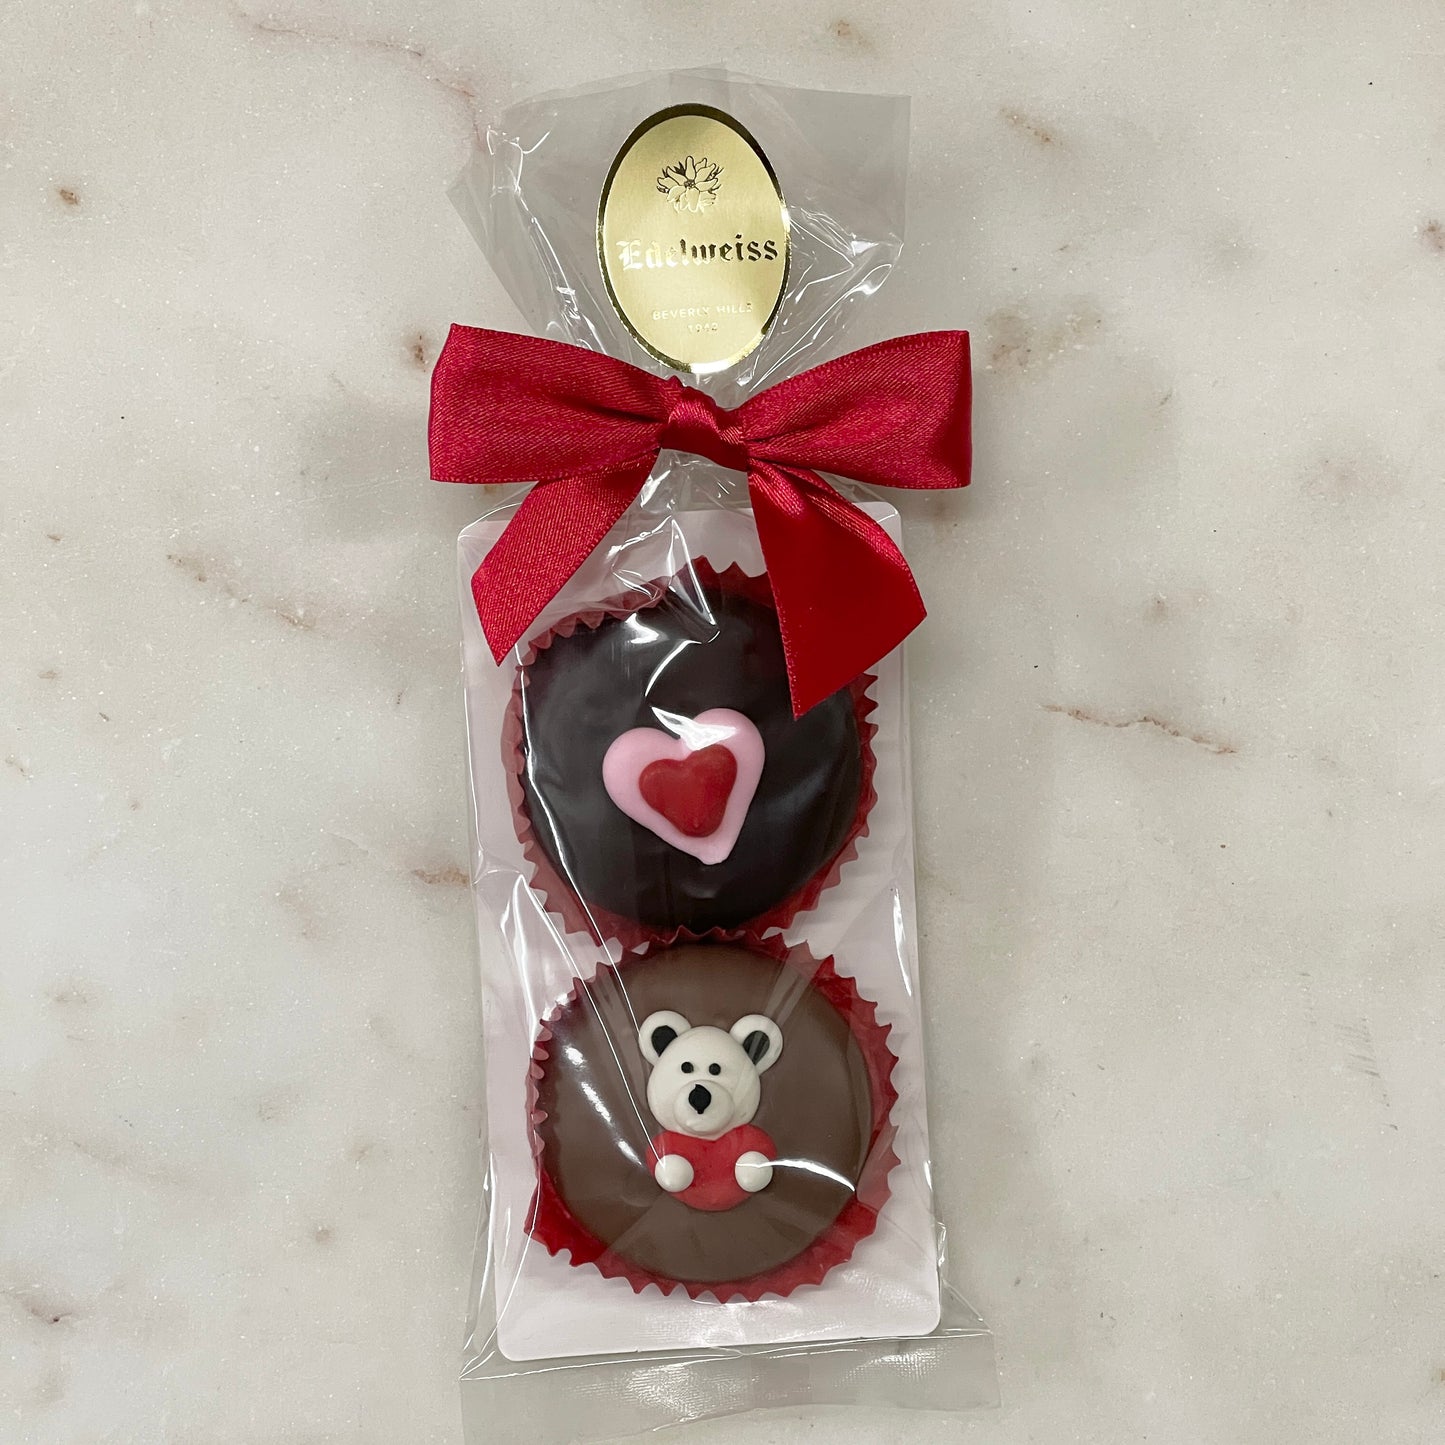 Gourmet Handmade Chocolate Oreos For Valentine's Day (2 Piece Gift Bag) - Edelweiss Chocolates - Gourmet Premium Handmade Chocolates made in Beverly Hills and Los Angeles